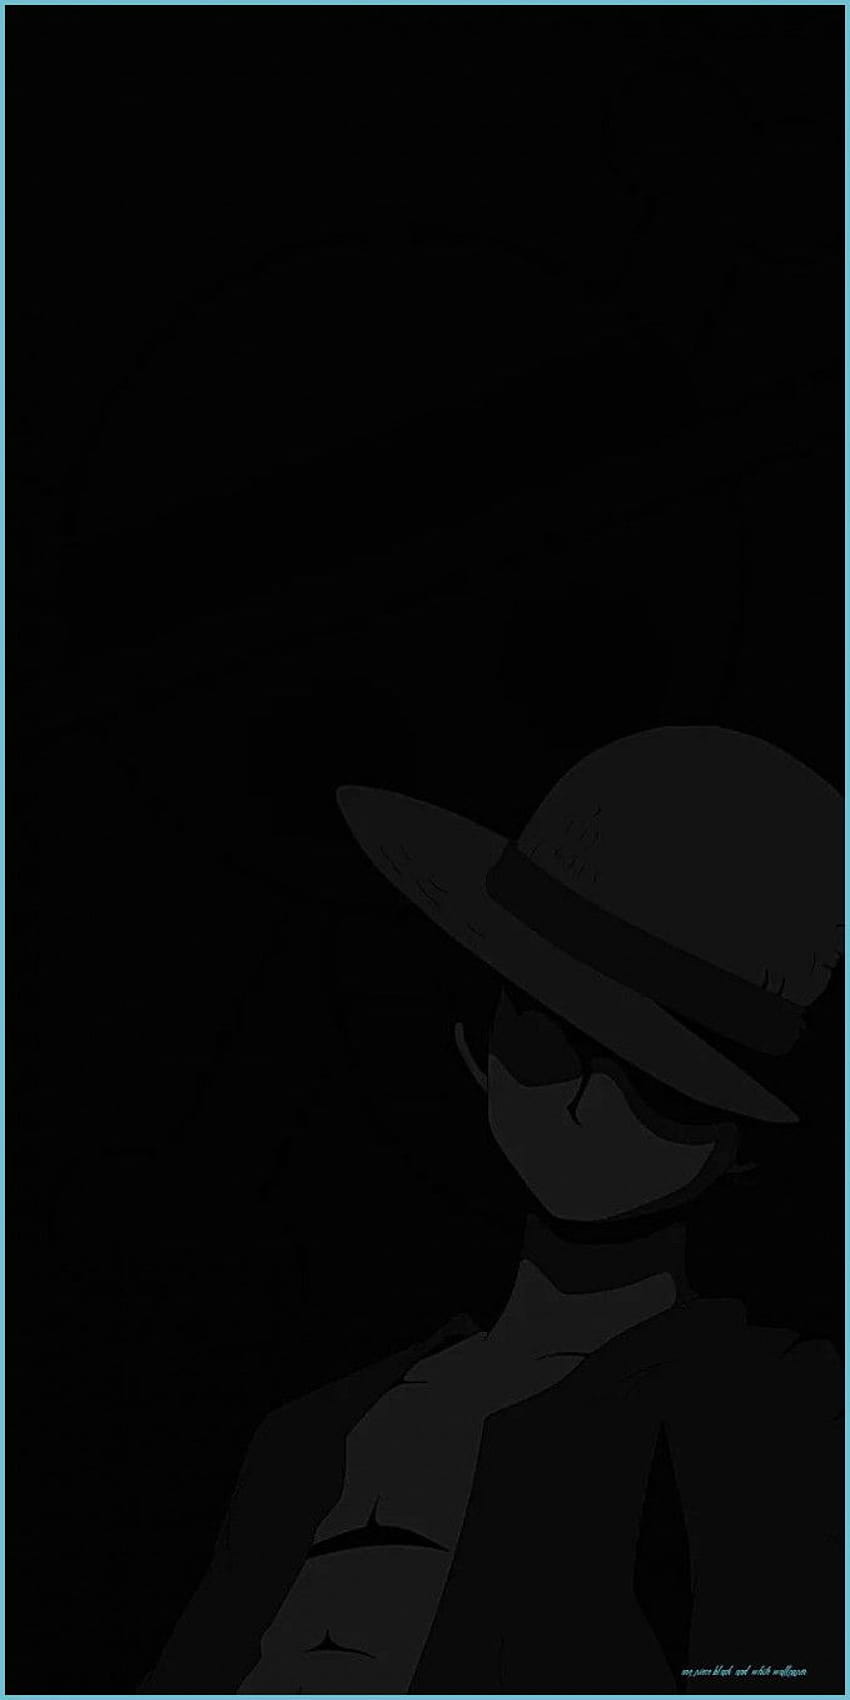 Black One Piece Wallpapers on WallpaperDog